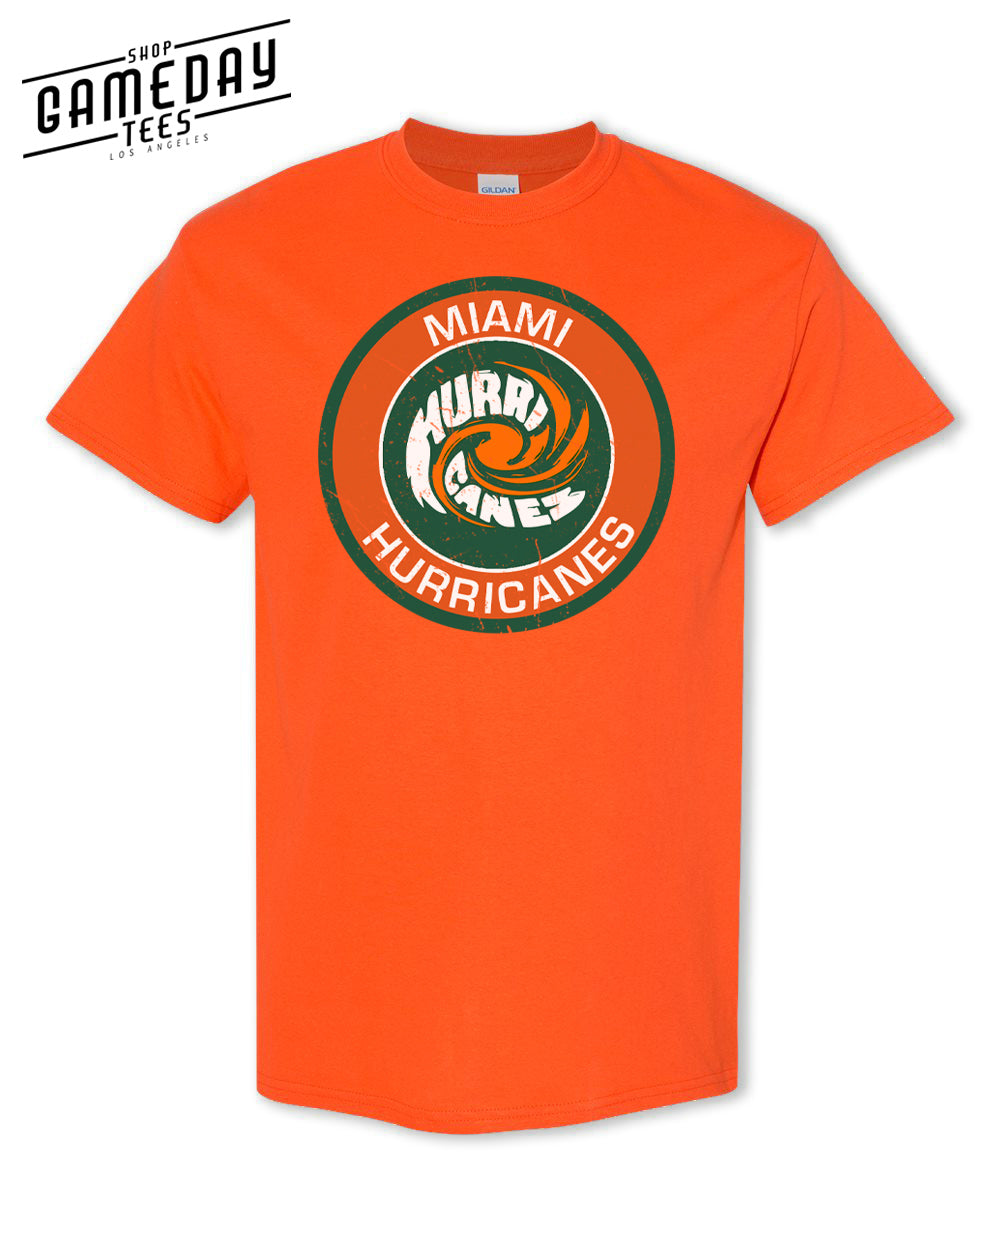 University Of Miami College Apparel Gameday Tees University Of Miami Hurricanes Unisex Shirt NCAA College Apparel and Gifts Collection UM College Gameday Tee Black1